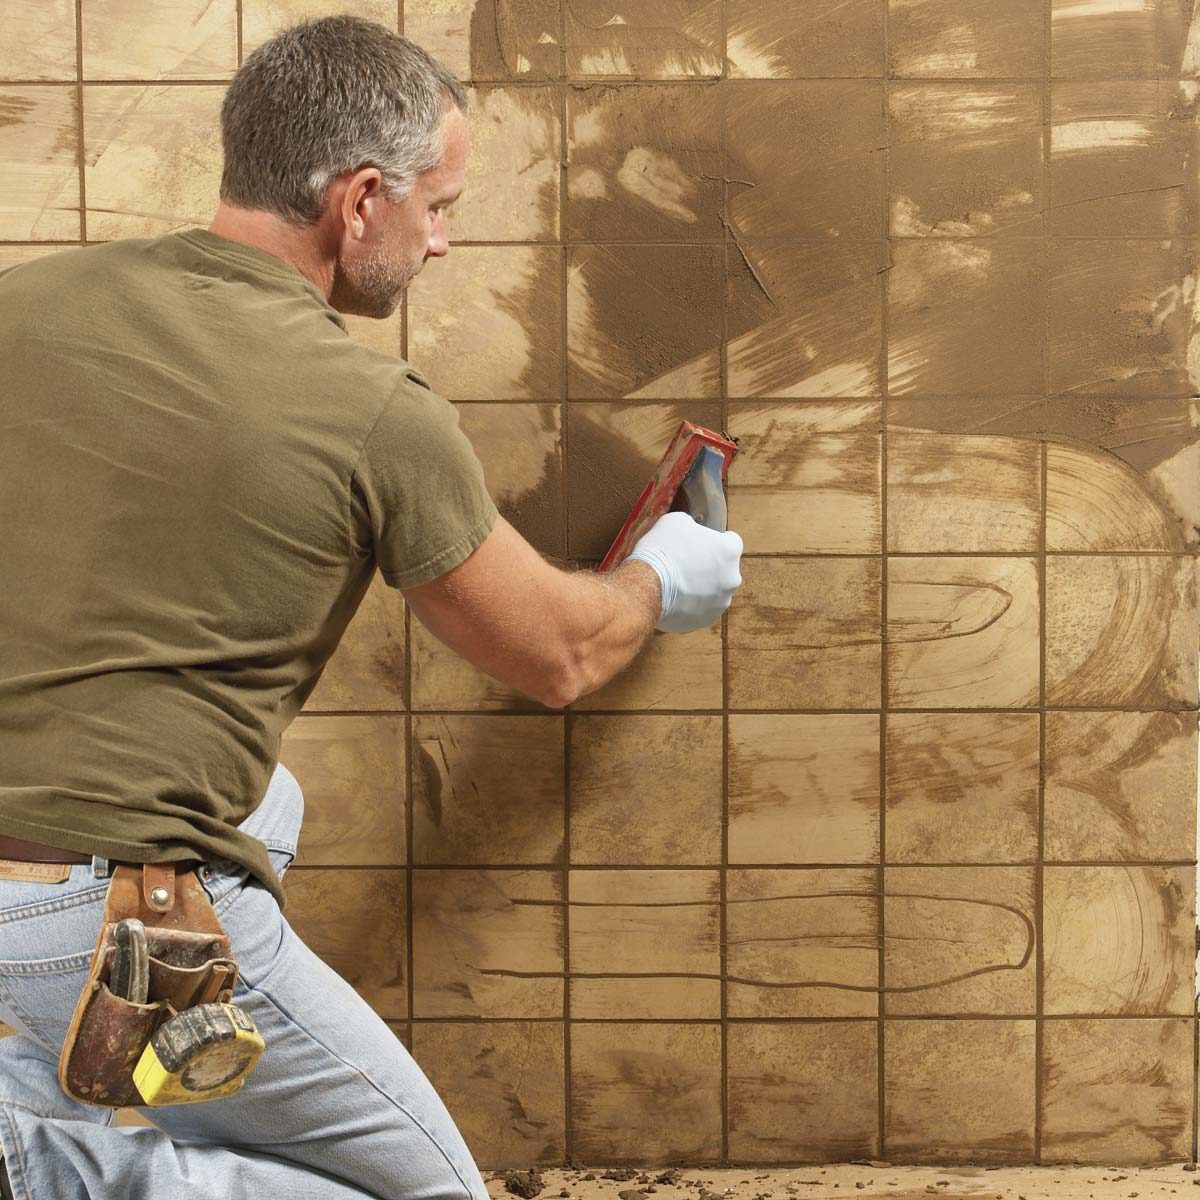 How To Grout Tile Grouting Tips And Techniques Family Handyman